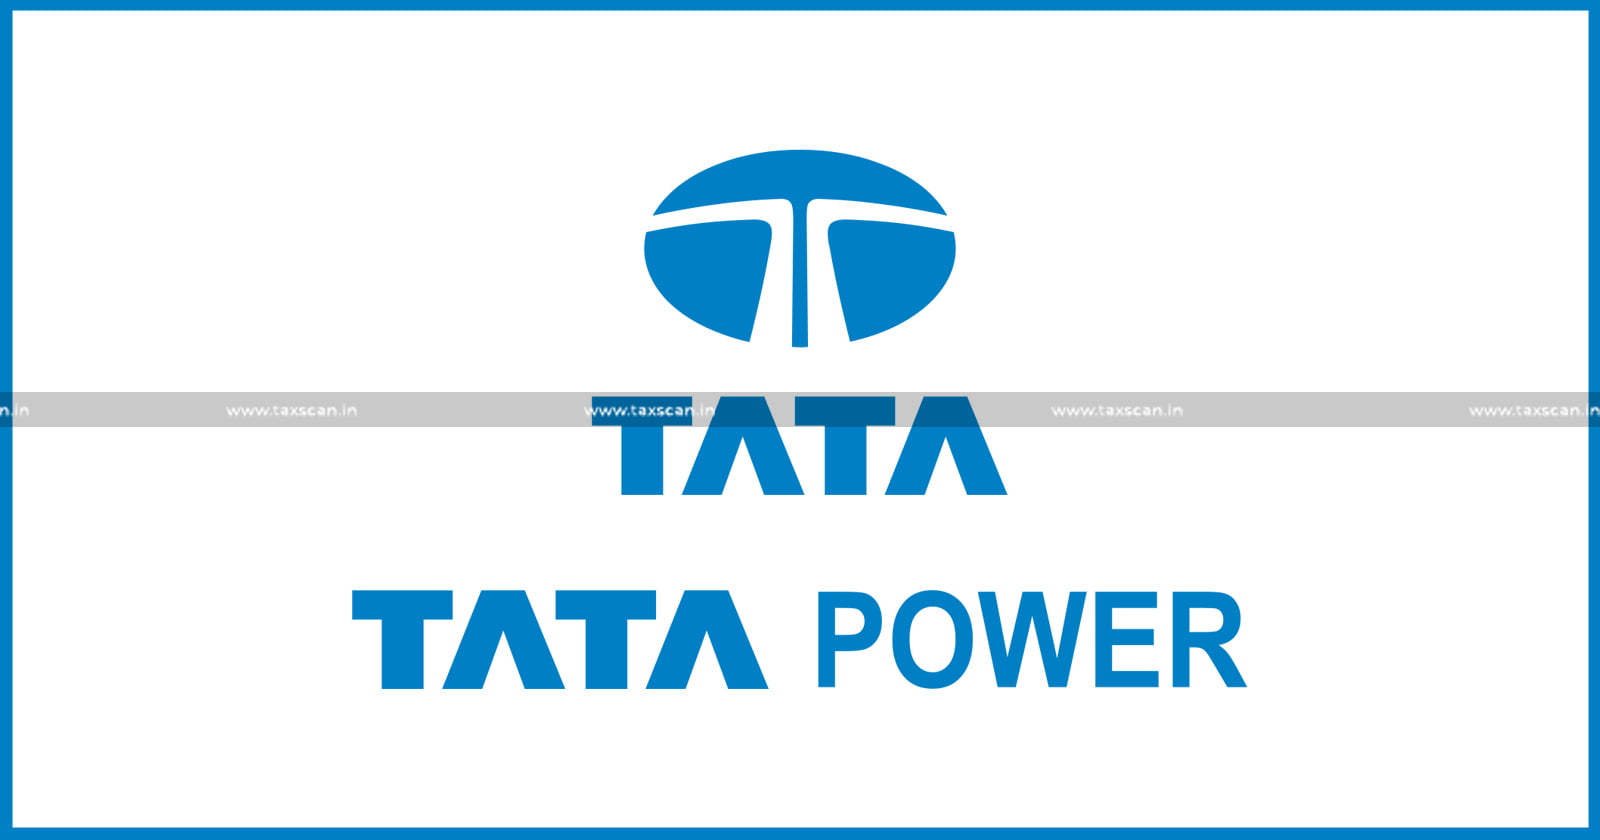 Relief to TATA Power - TATA Power - ITAT deletes Adjustment made Towards Technical Know-How Fees - ITAT - Entity Level Margins - Taxscan